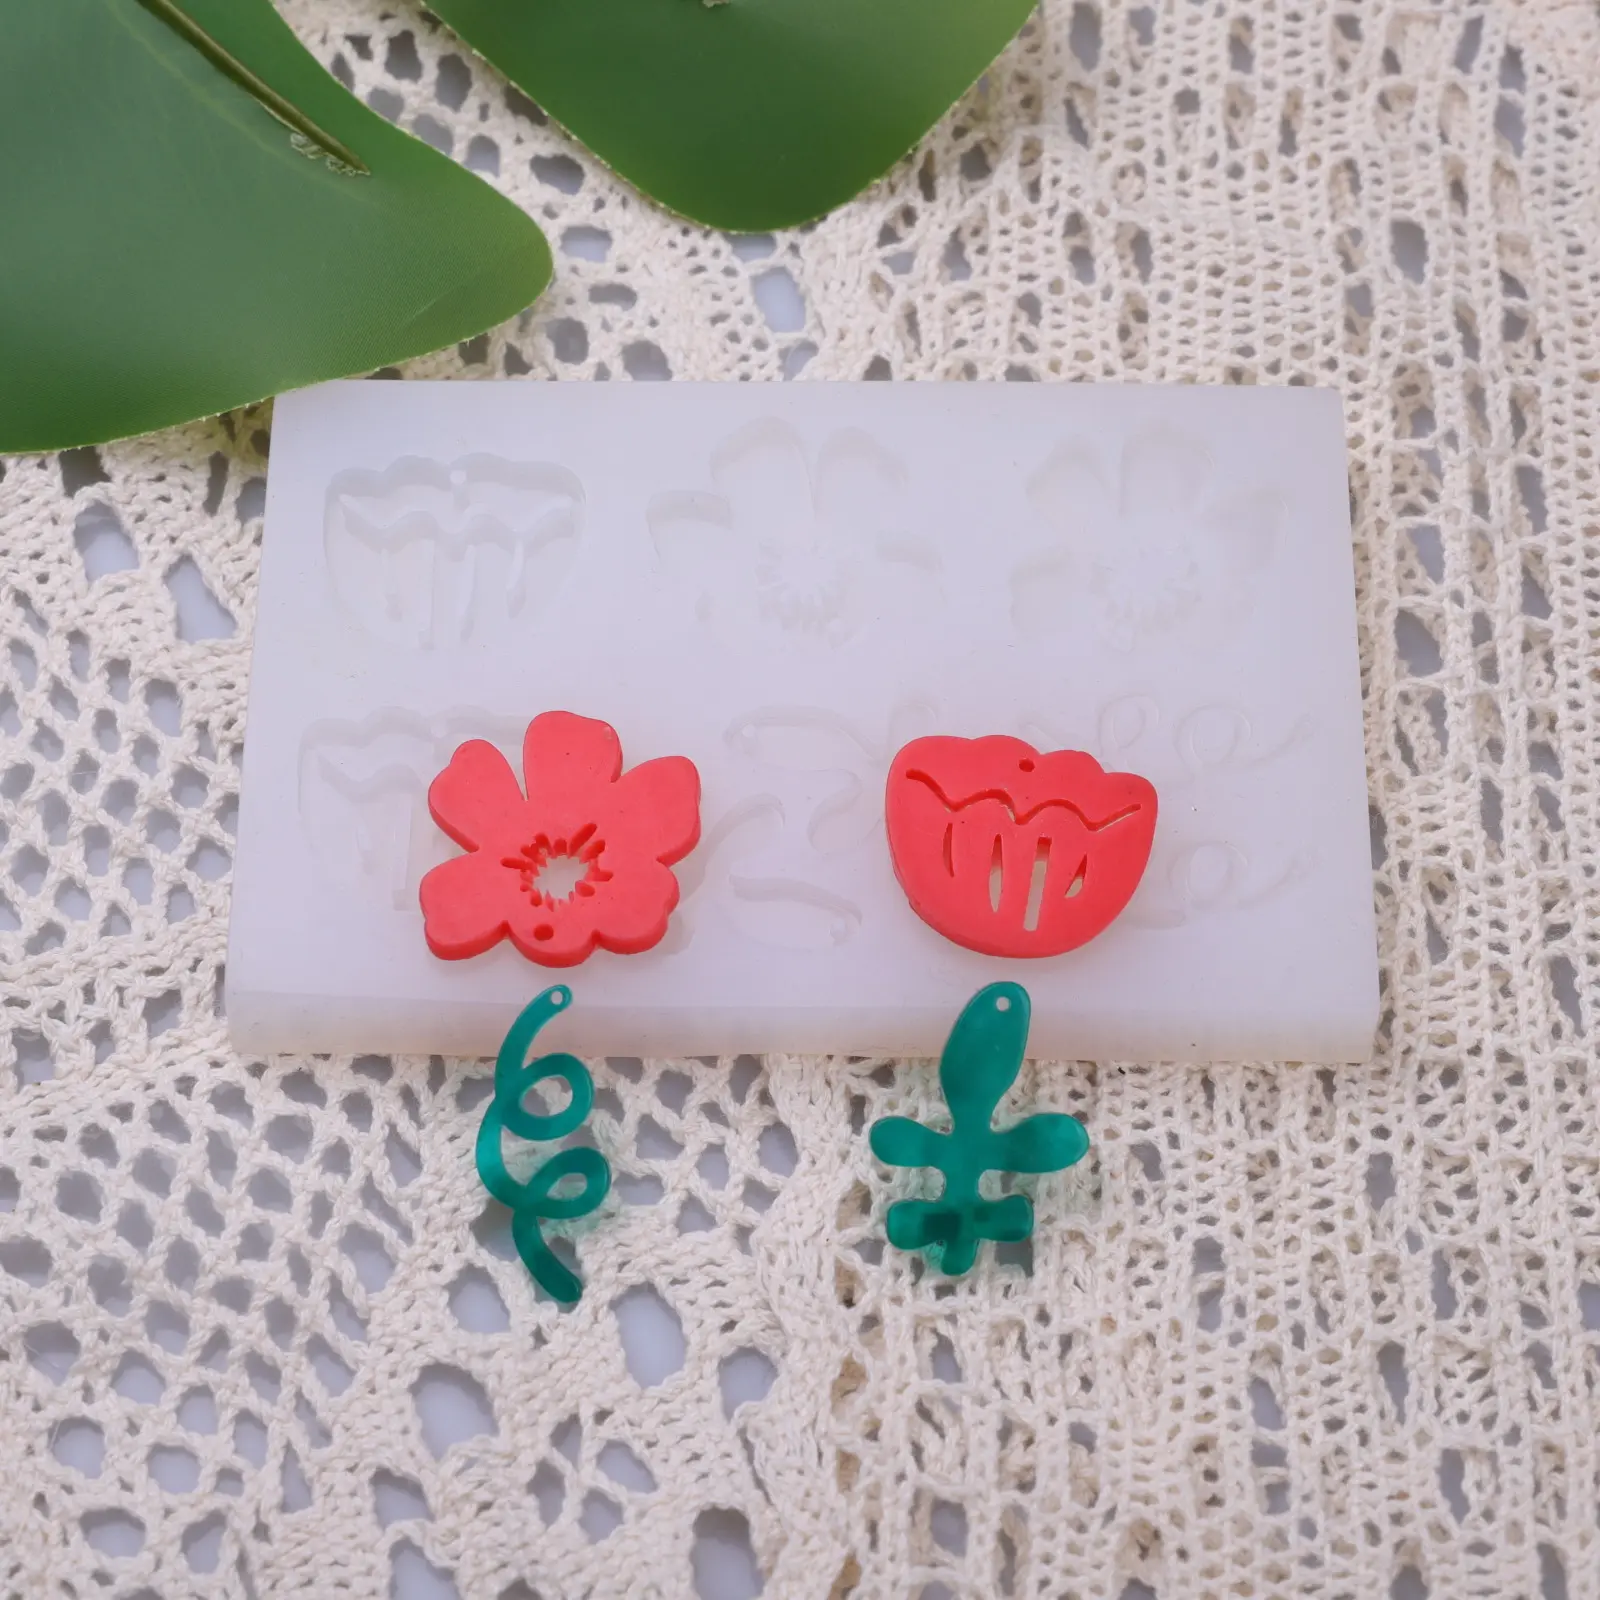 0065 New hot sale flower key ring drop glue mold DIY earring material silicone molds